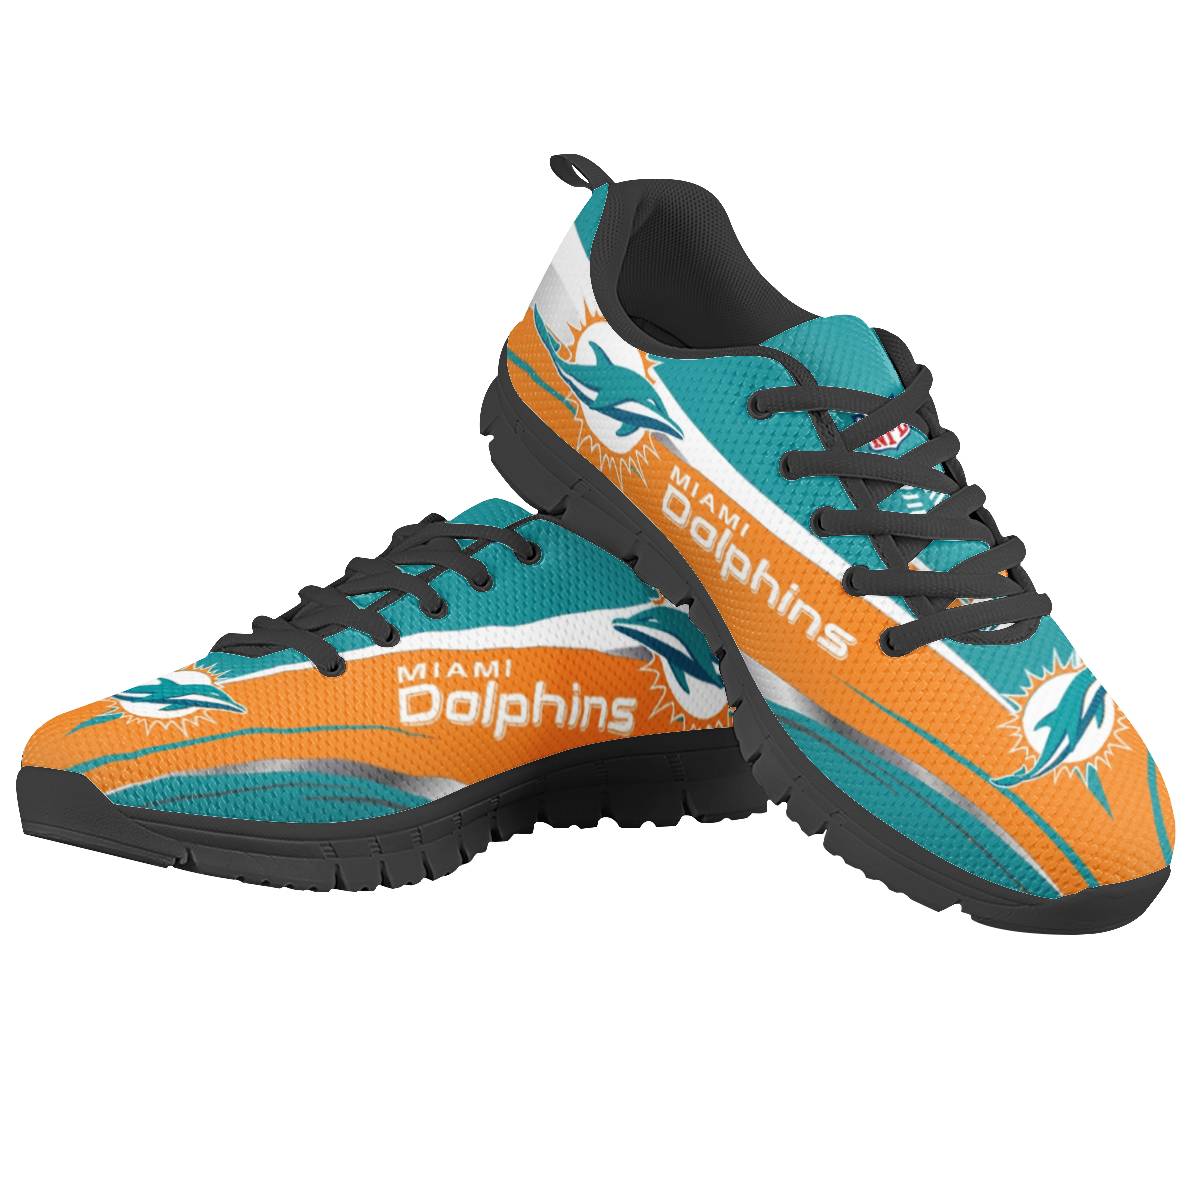 Men's Miami Dolphins AQ Running Shoes 002